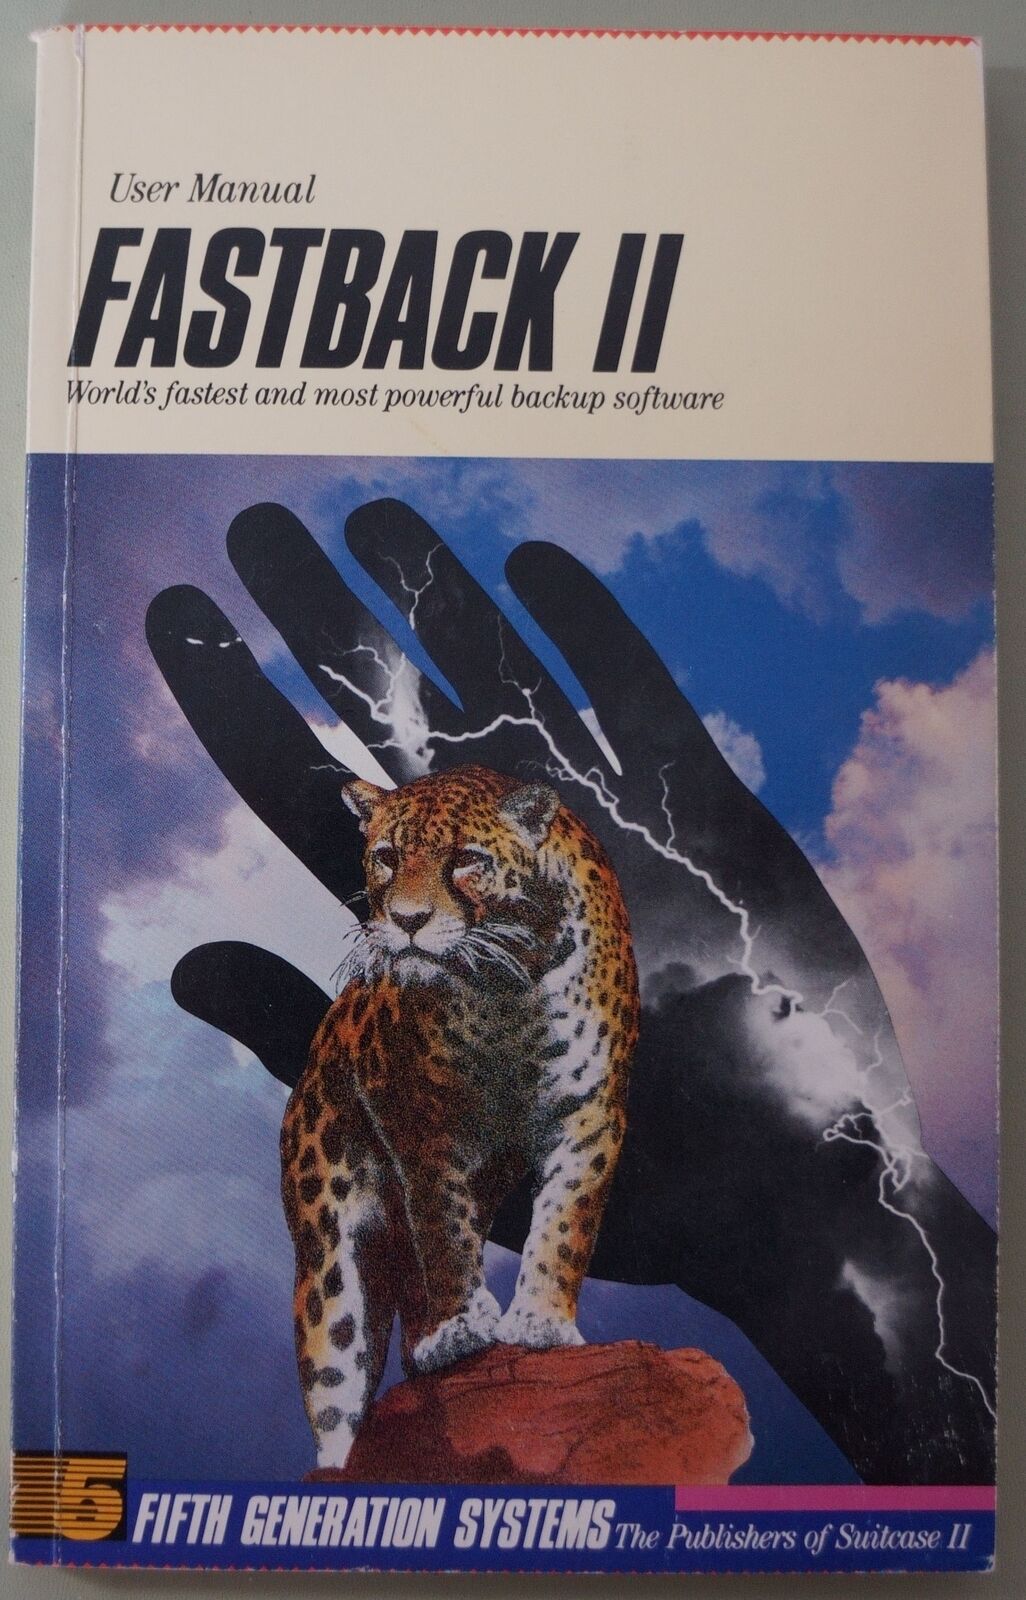 Fifth Generation Systems - Fastback II Backup Software for Mac User Manual 1989